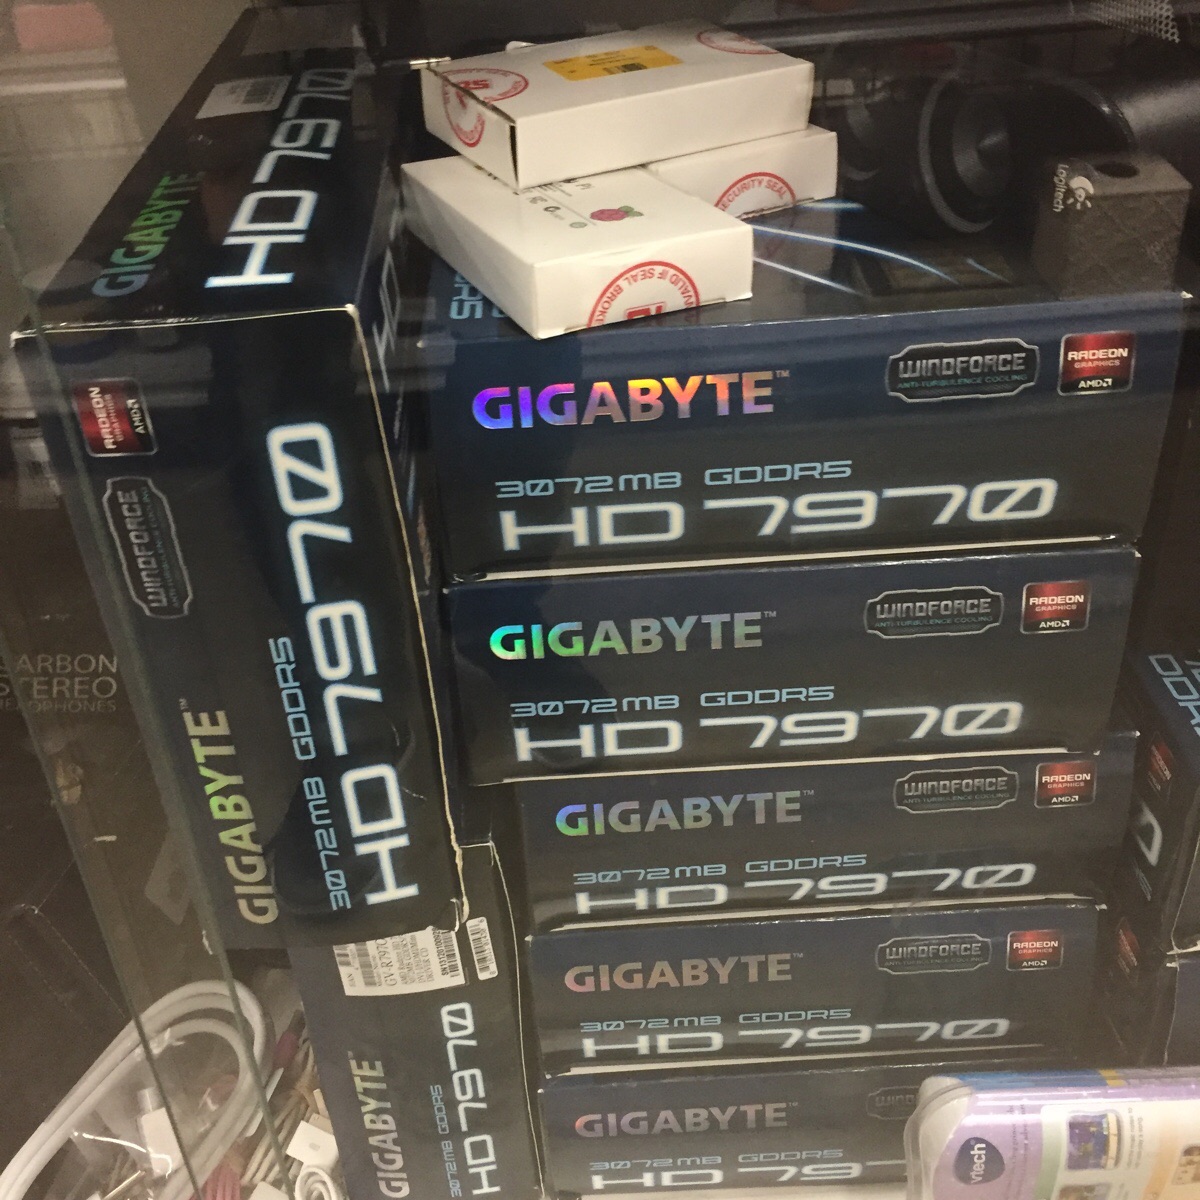 Found 12 new boxes of 7970 at goodwill for $99 each; Is it worth it?